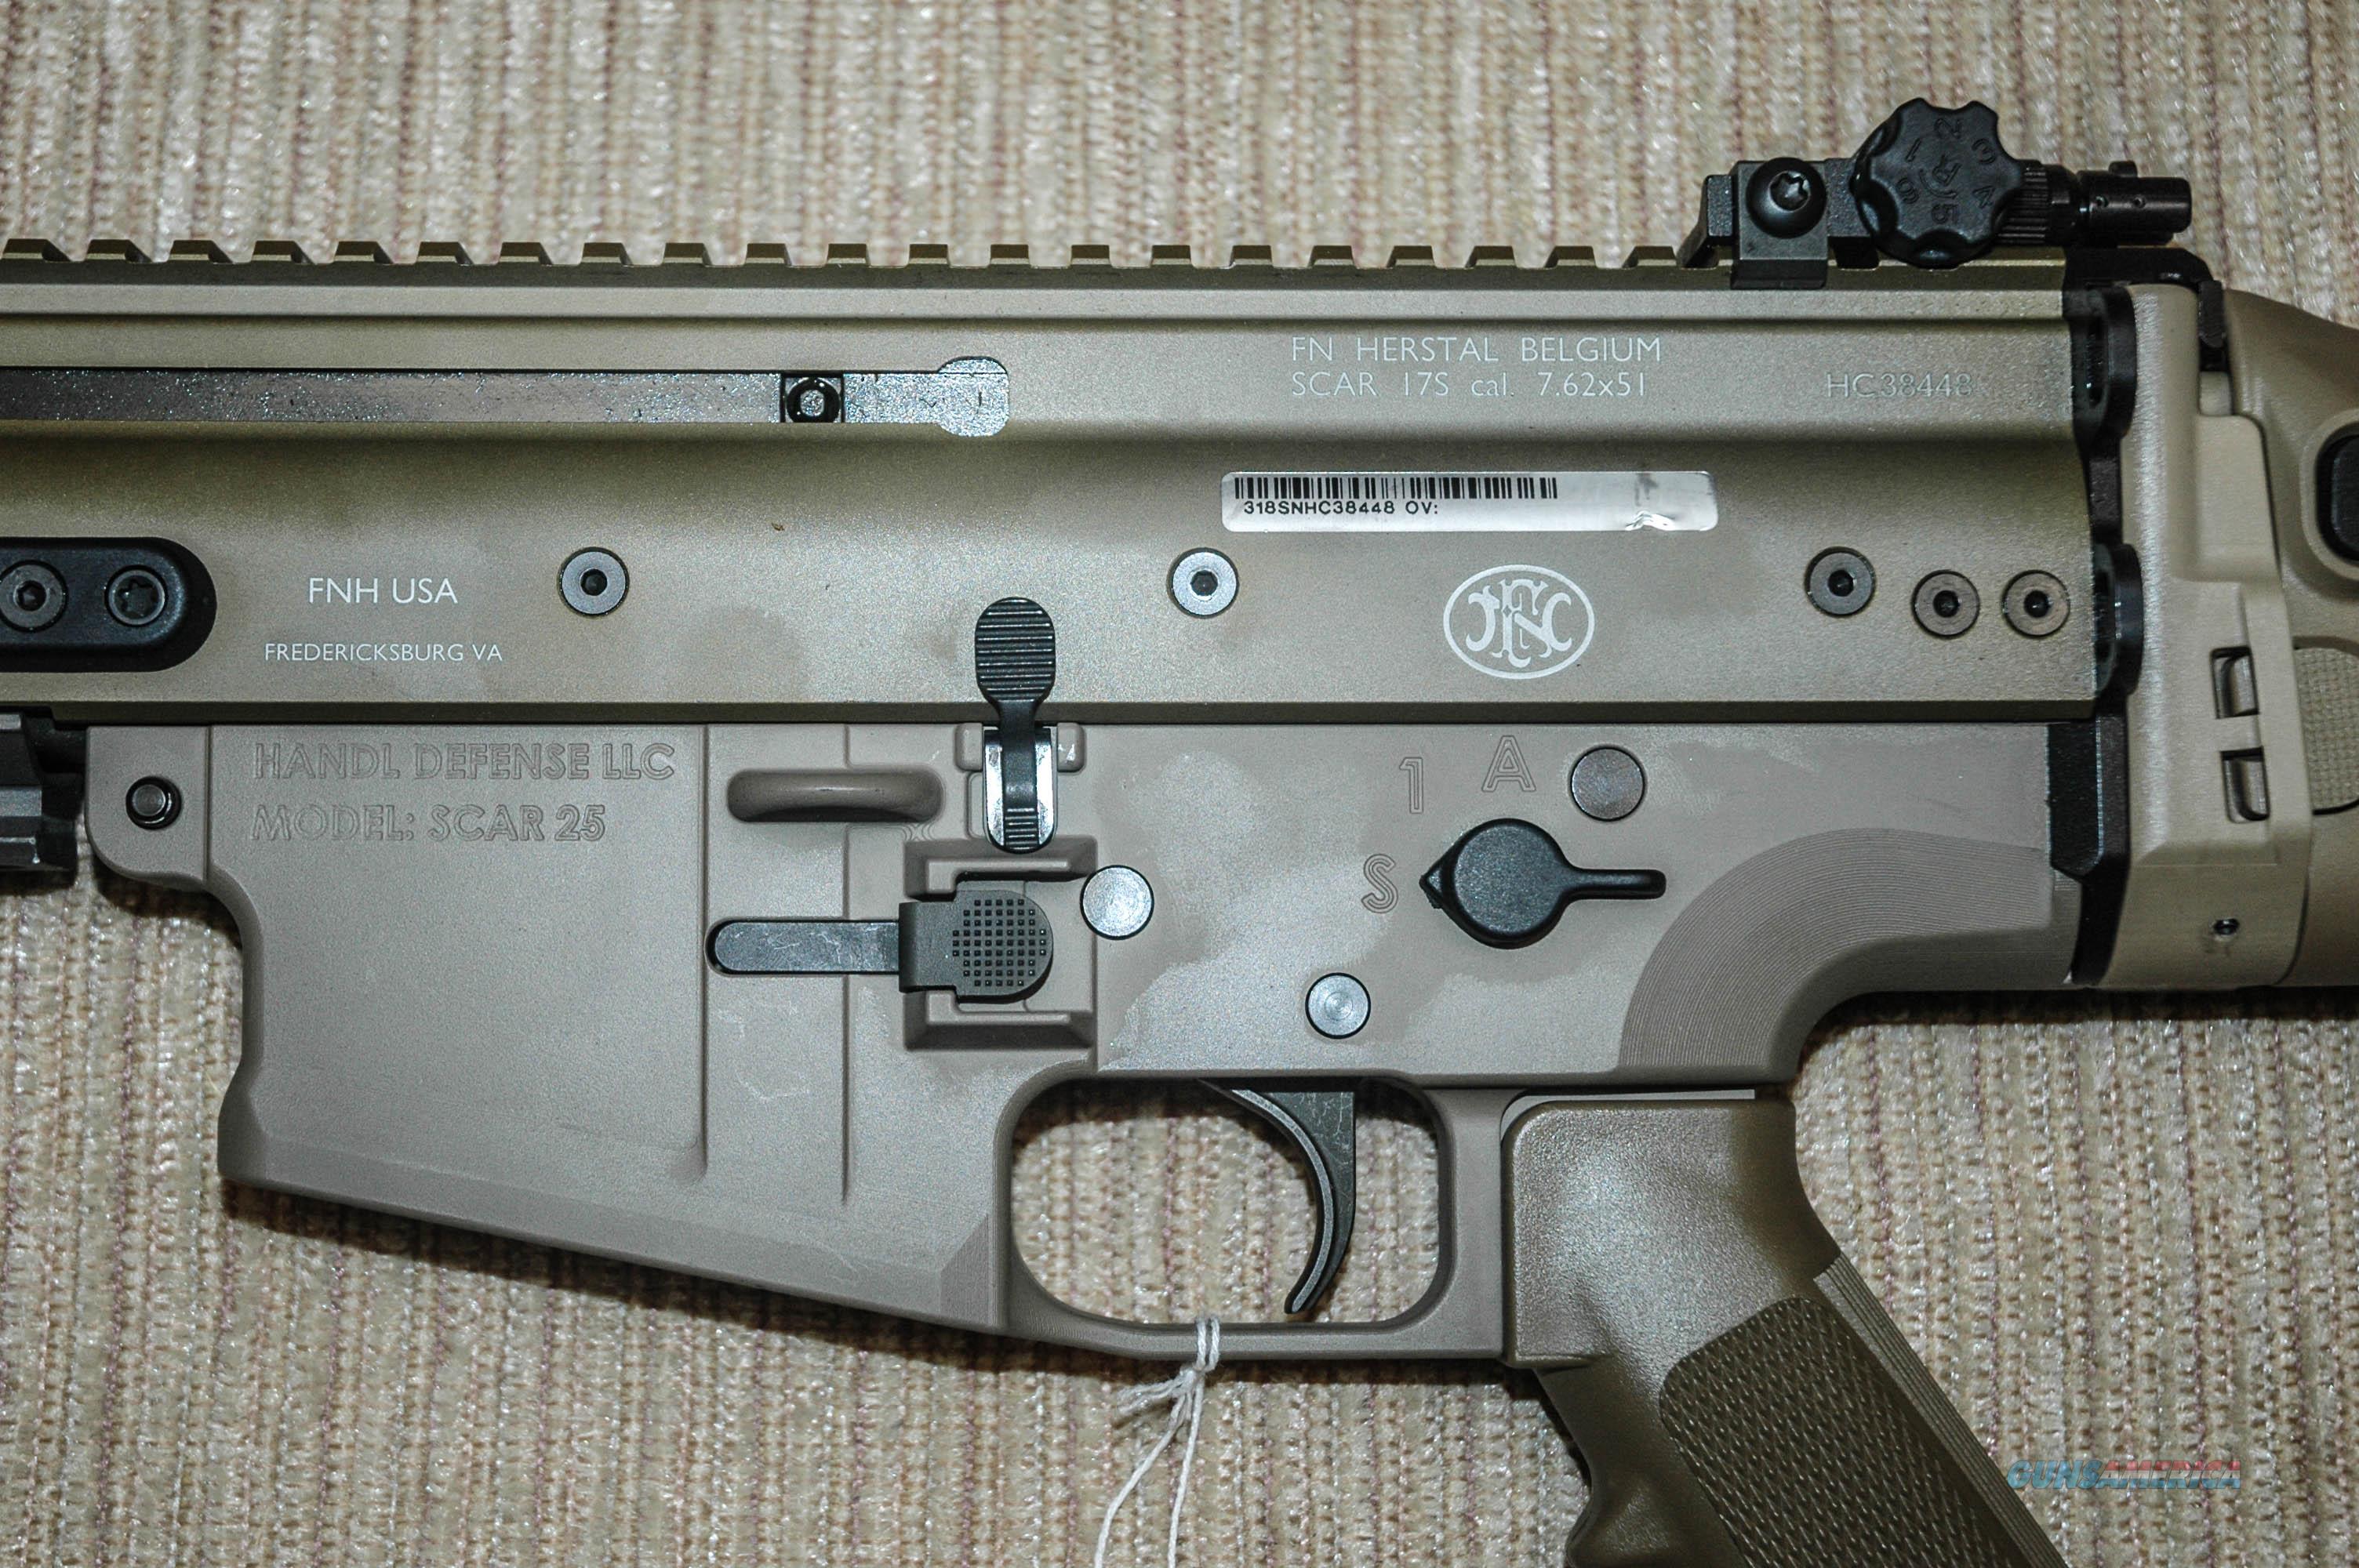 Scar 17s Used with Handl Defense Sc... for sale at Gunsamerica.com ...